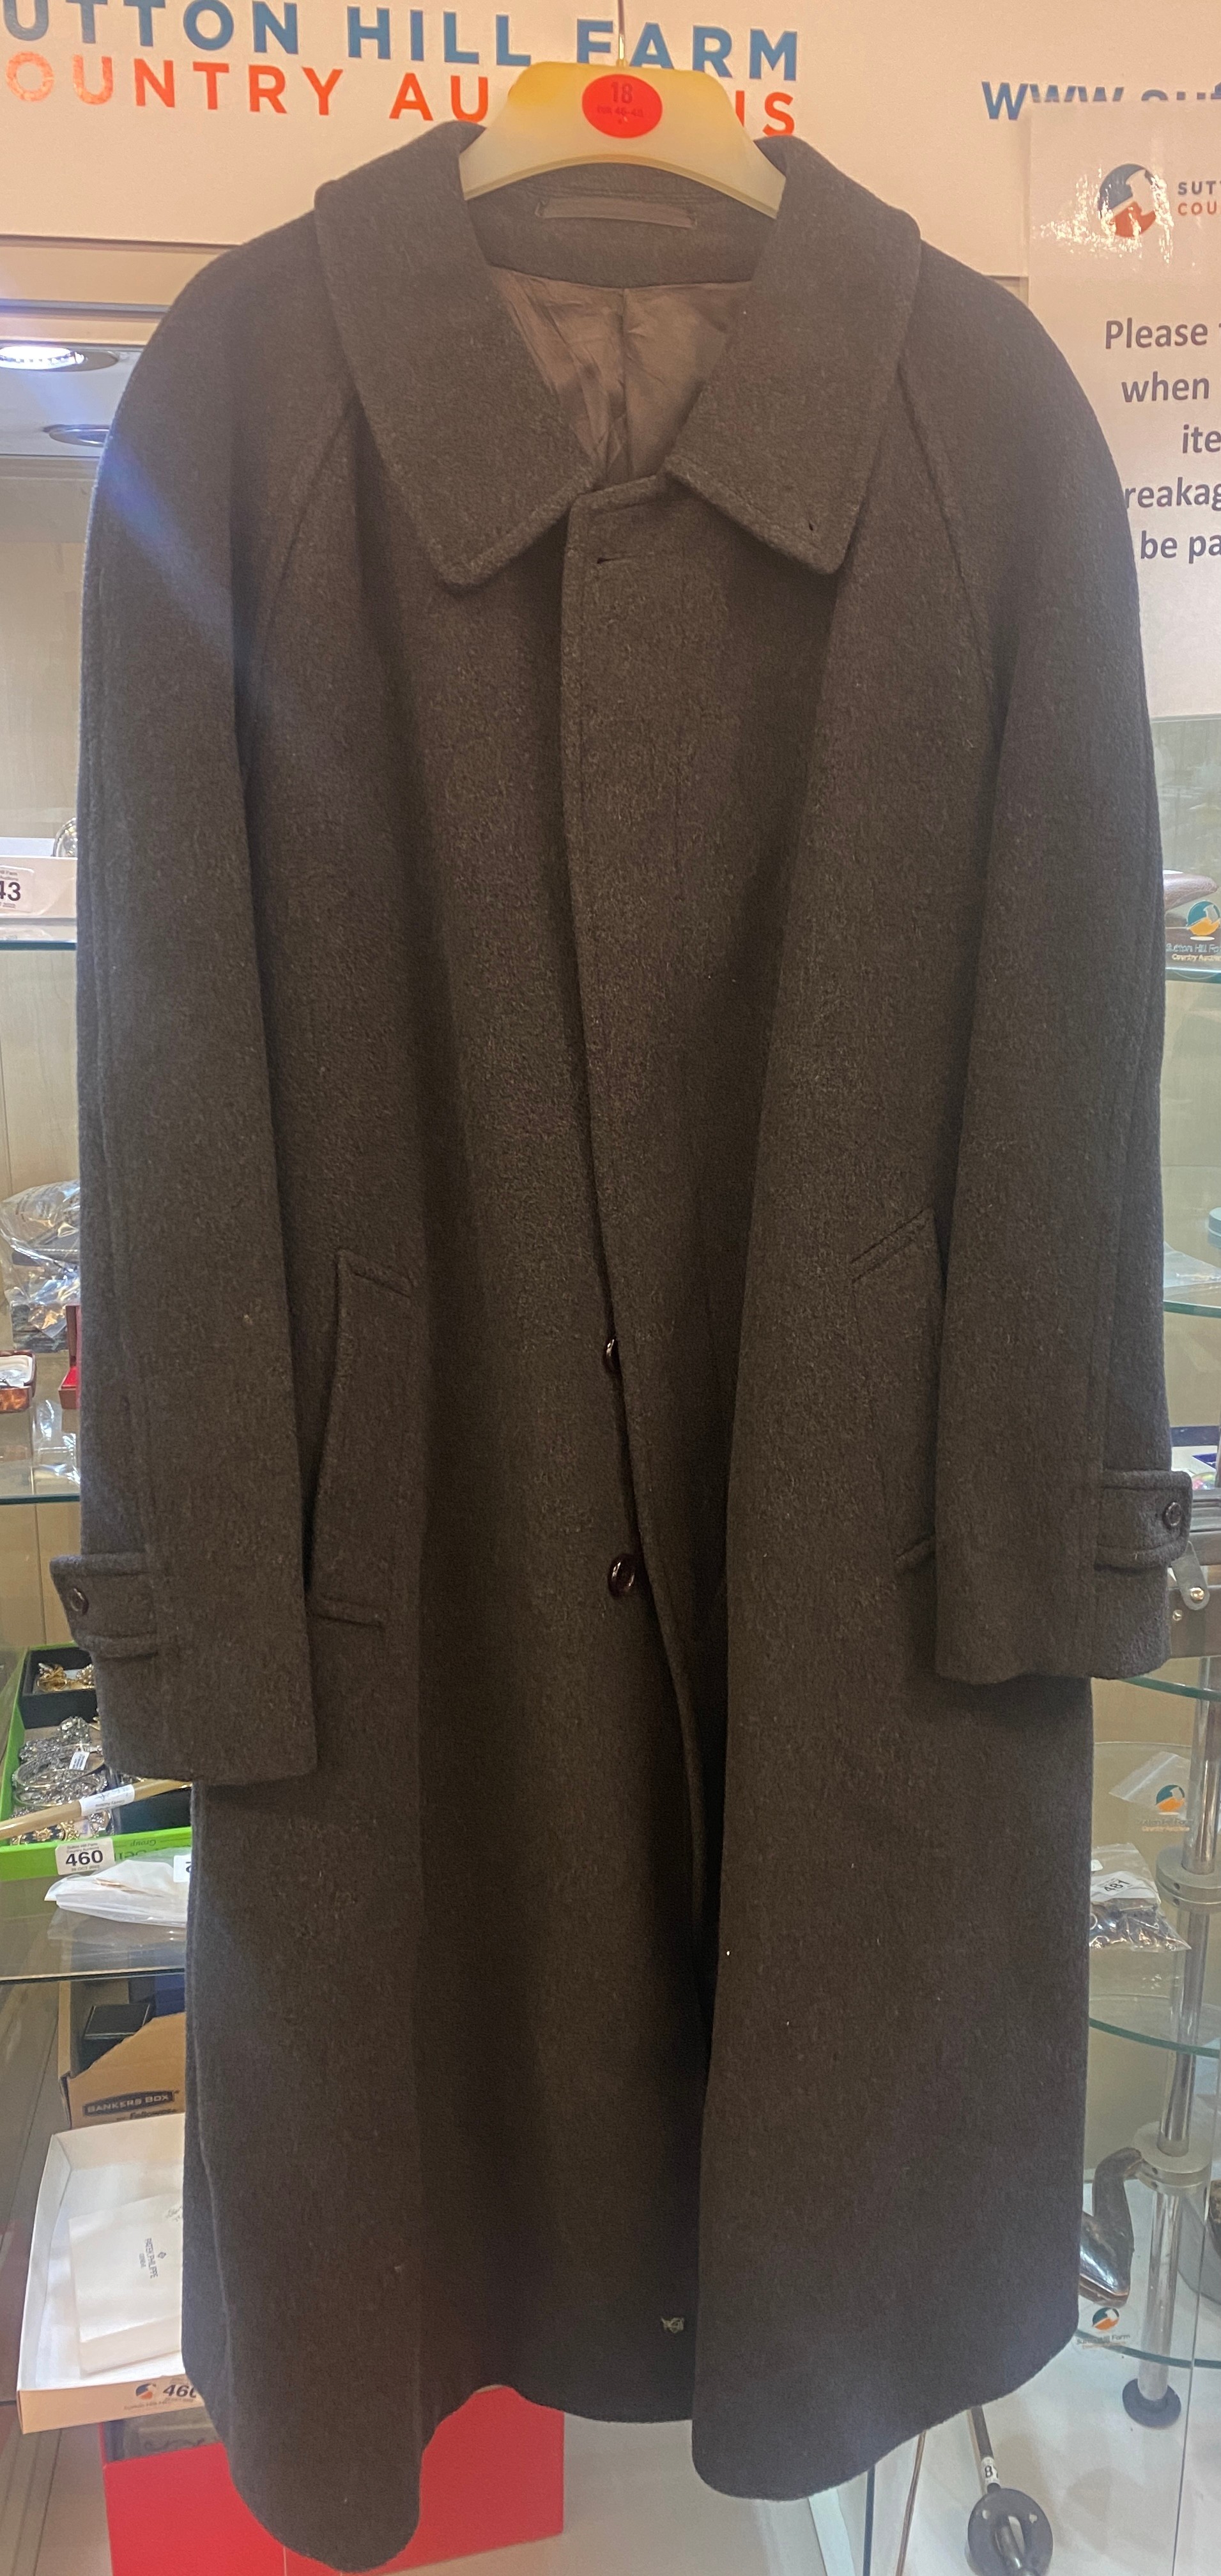 Gents Wool over coat size XL 126cm long - Image 2 of 2